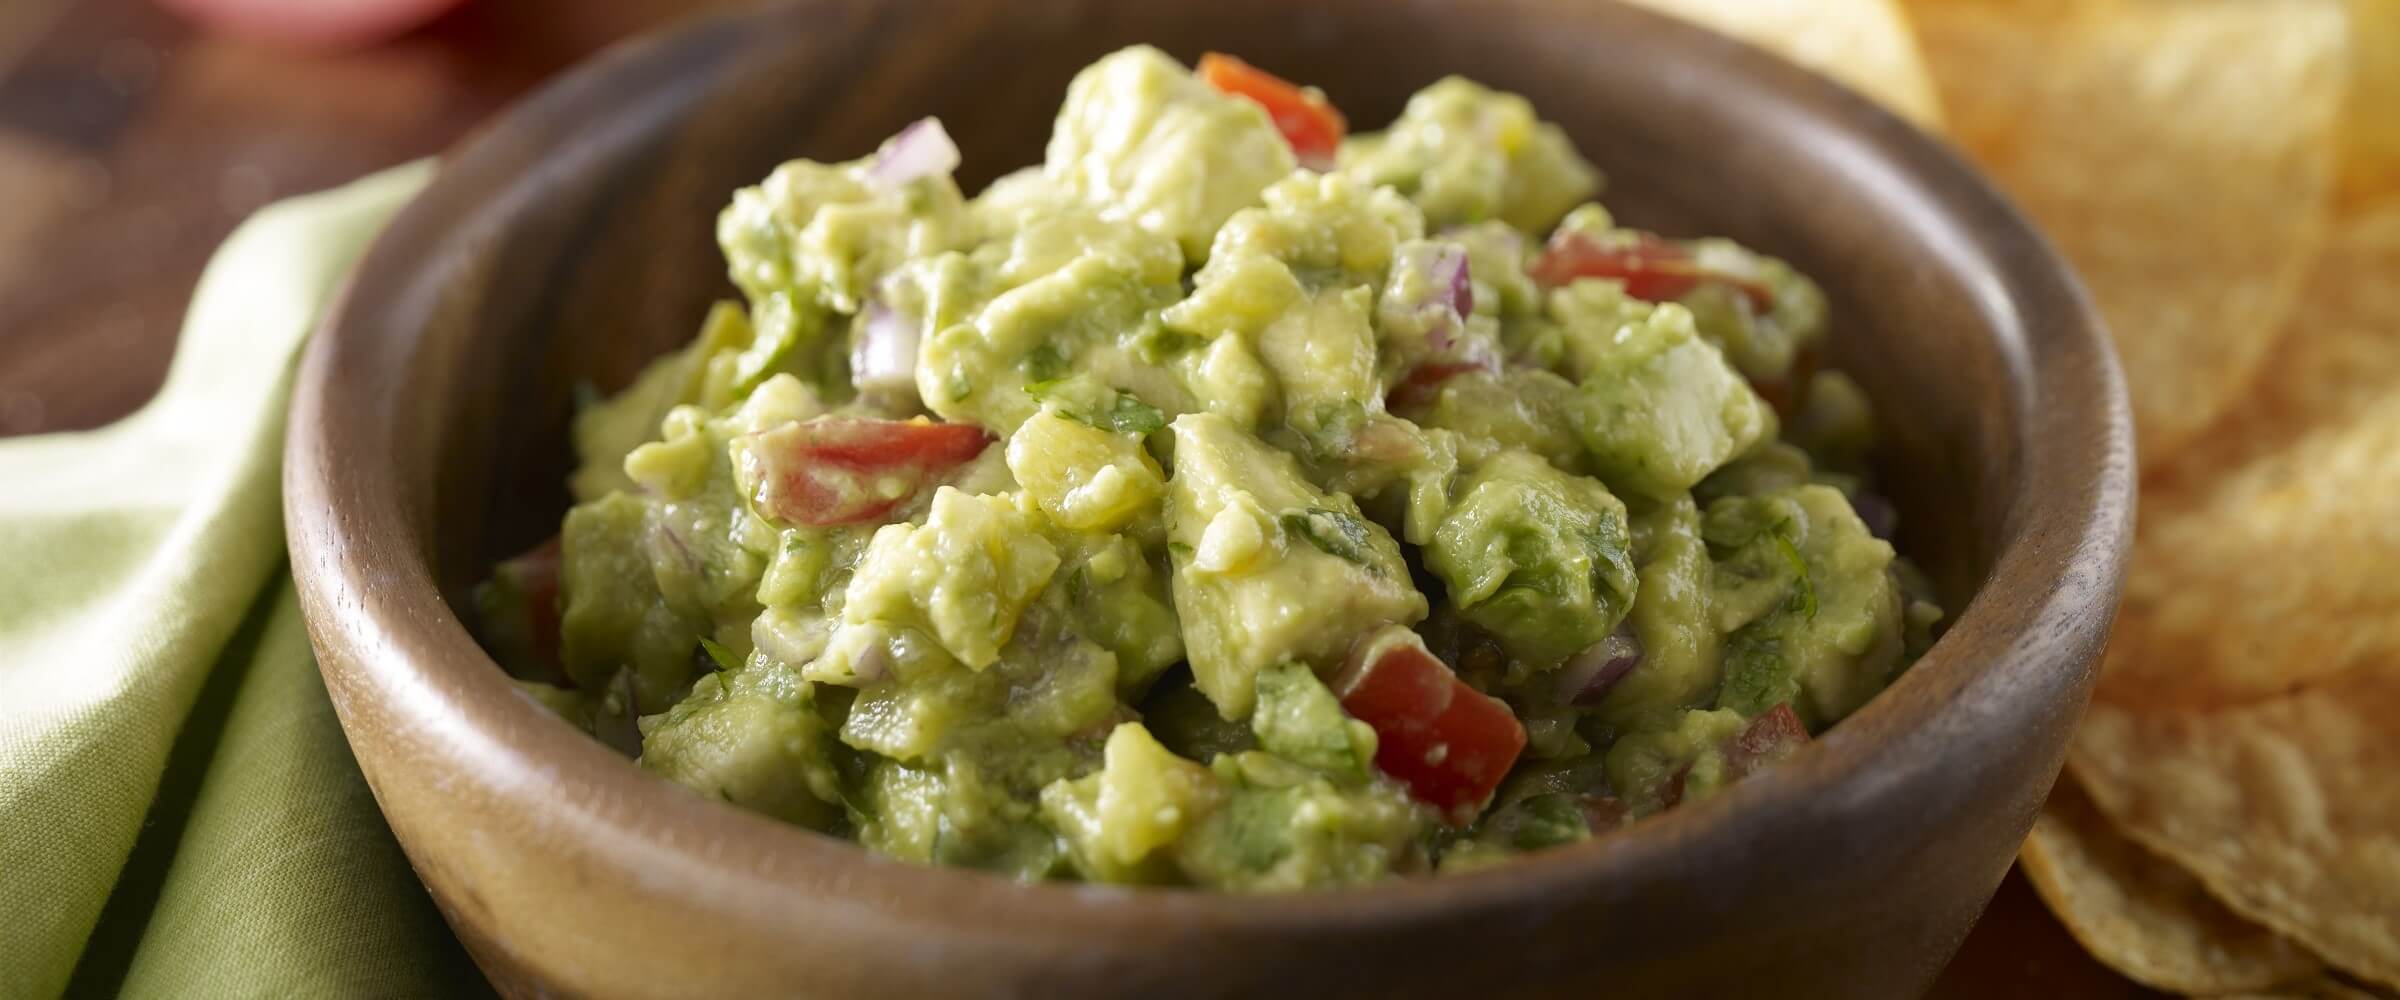 Garden guacamole in brown bowl with chips on side